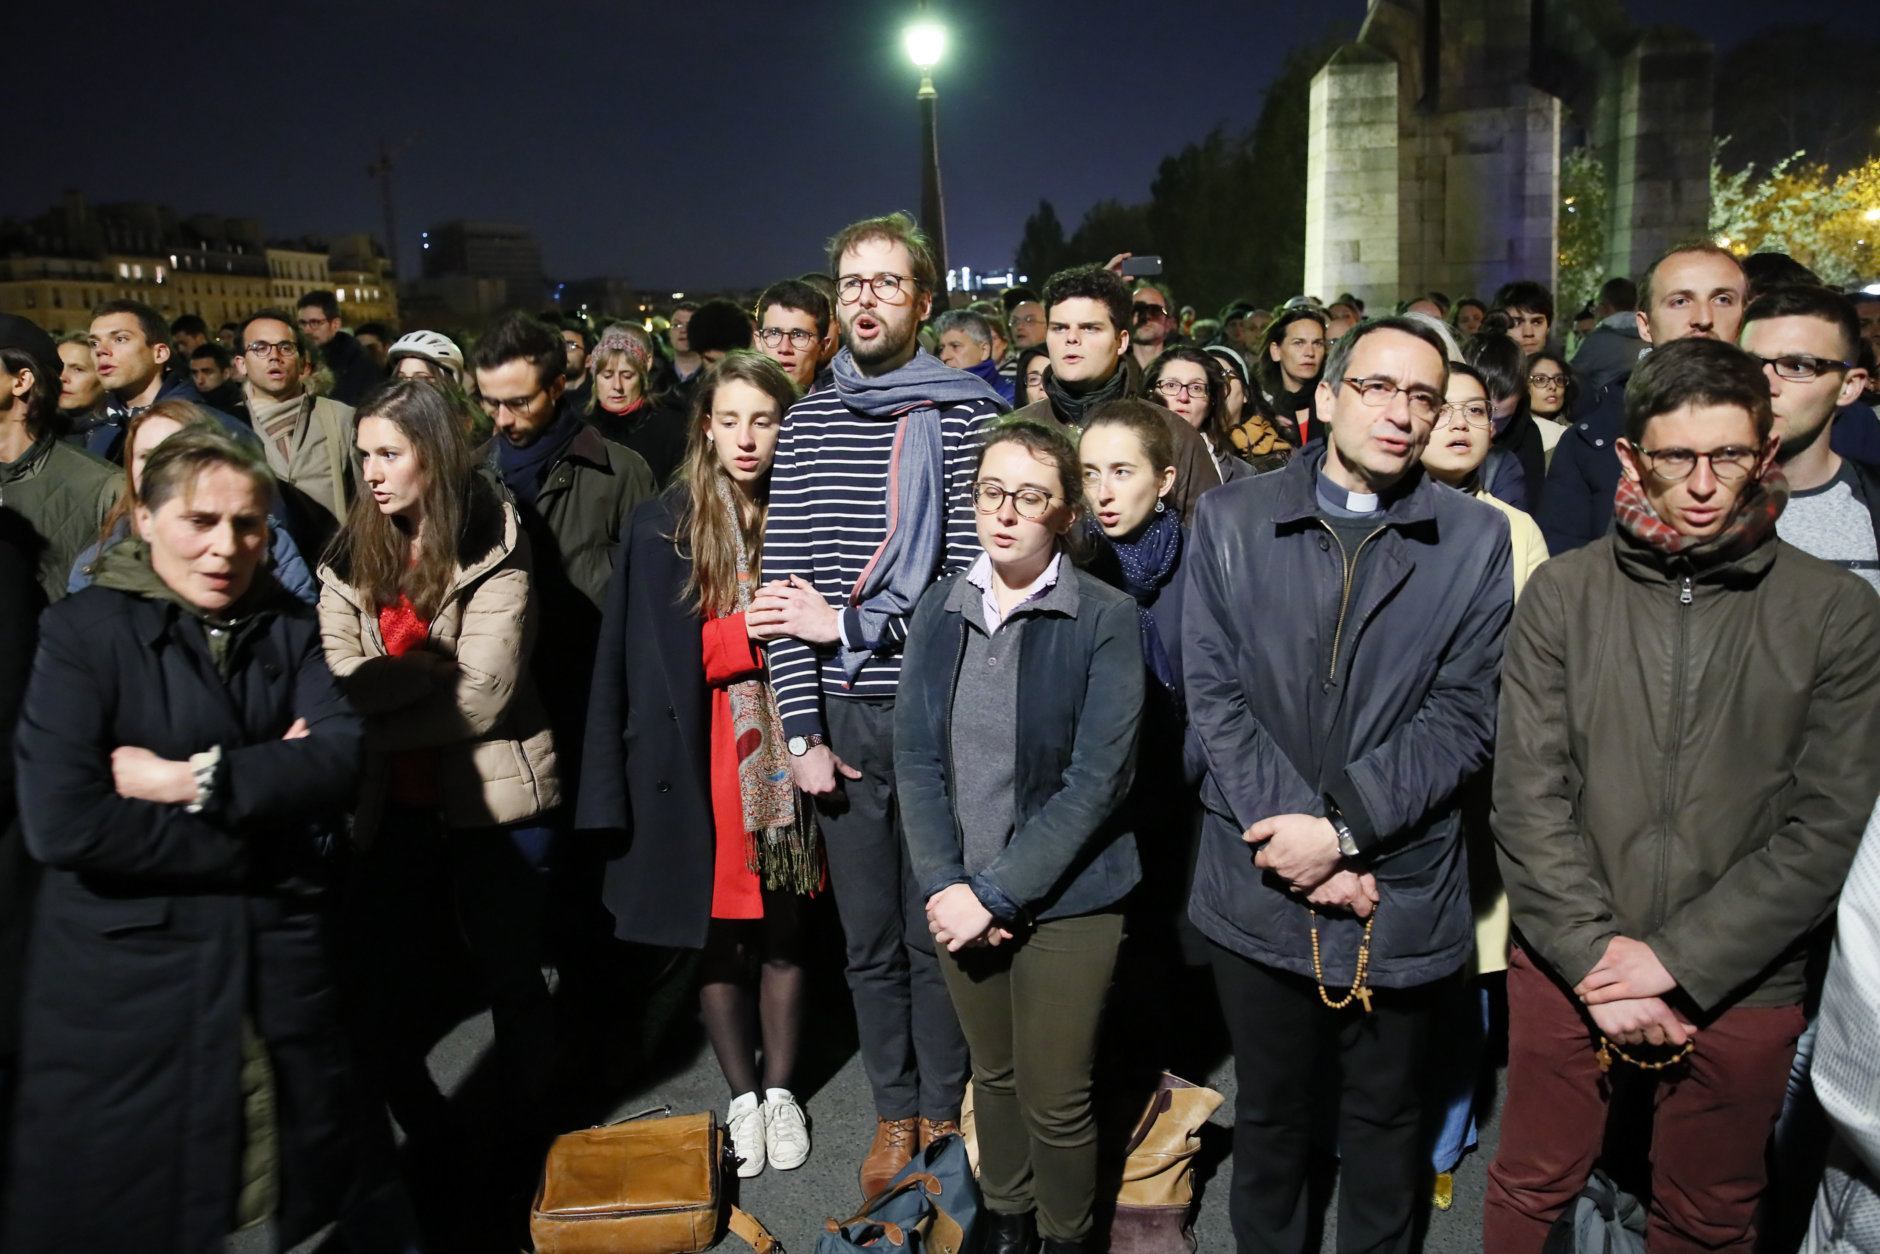 People pray as Notre Dame cathedral is burning in Paris, Monday, April 15, 2019. A catastrophic fire engulfed the upper reaches of Paris' soaring Notre Dame Cathedral as it was undergoing renovations Monday, threatening one of the greatest architectural treasures of the Western world as tourists and Parisians looked on aghast from the streets below. (AP Photo/Francois Mori)